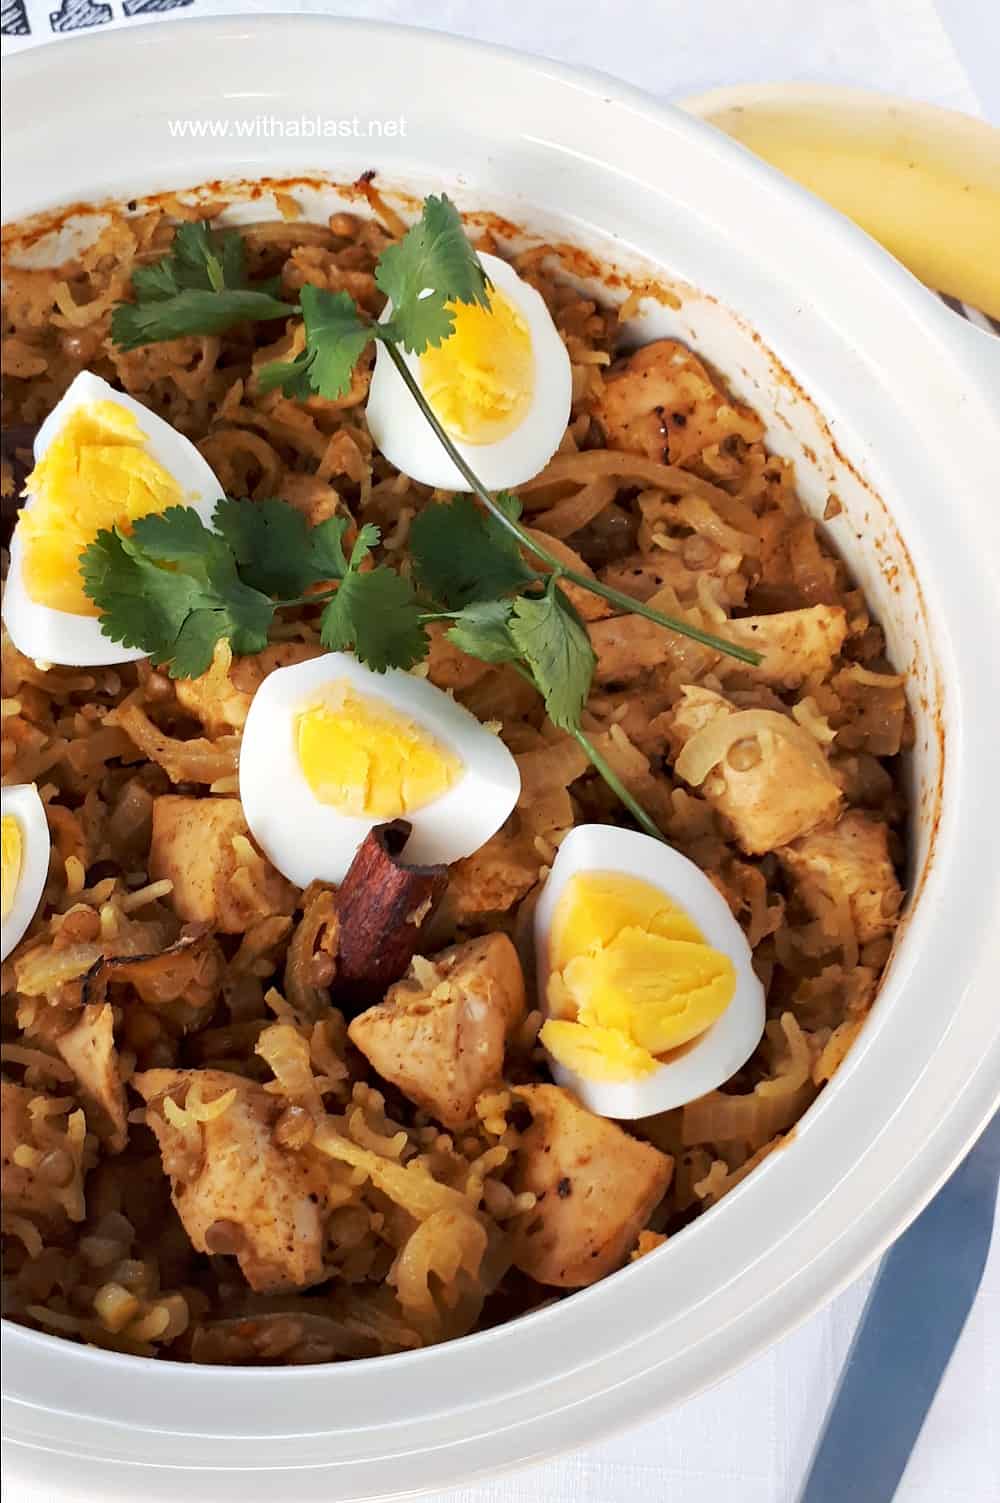 Perfectly spiced Cape Chicken Breyani is a dinner dish loved by all ages